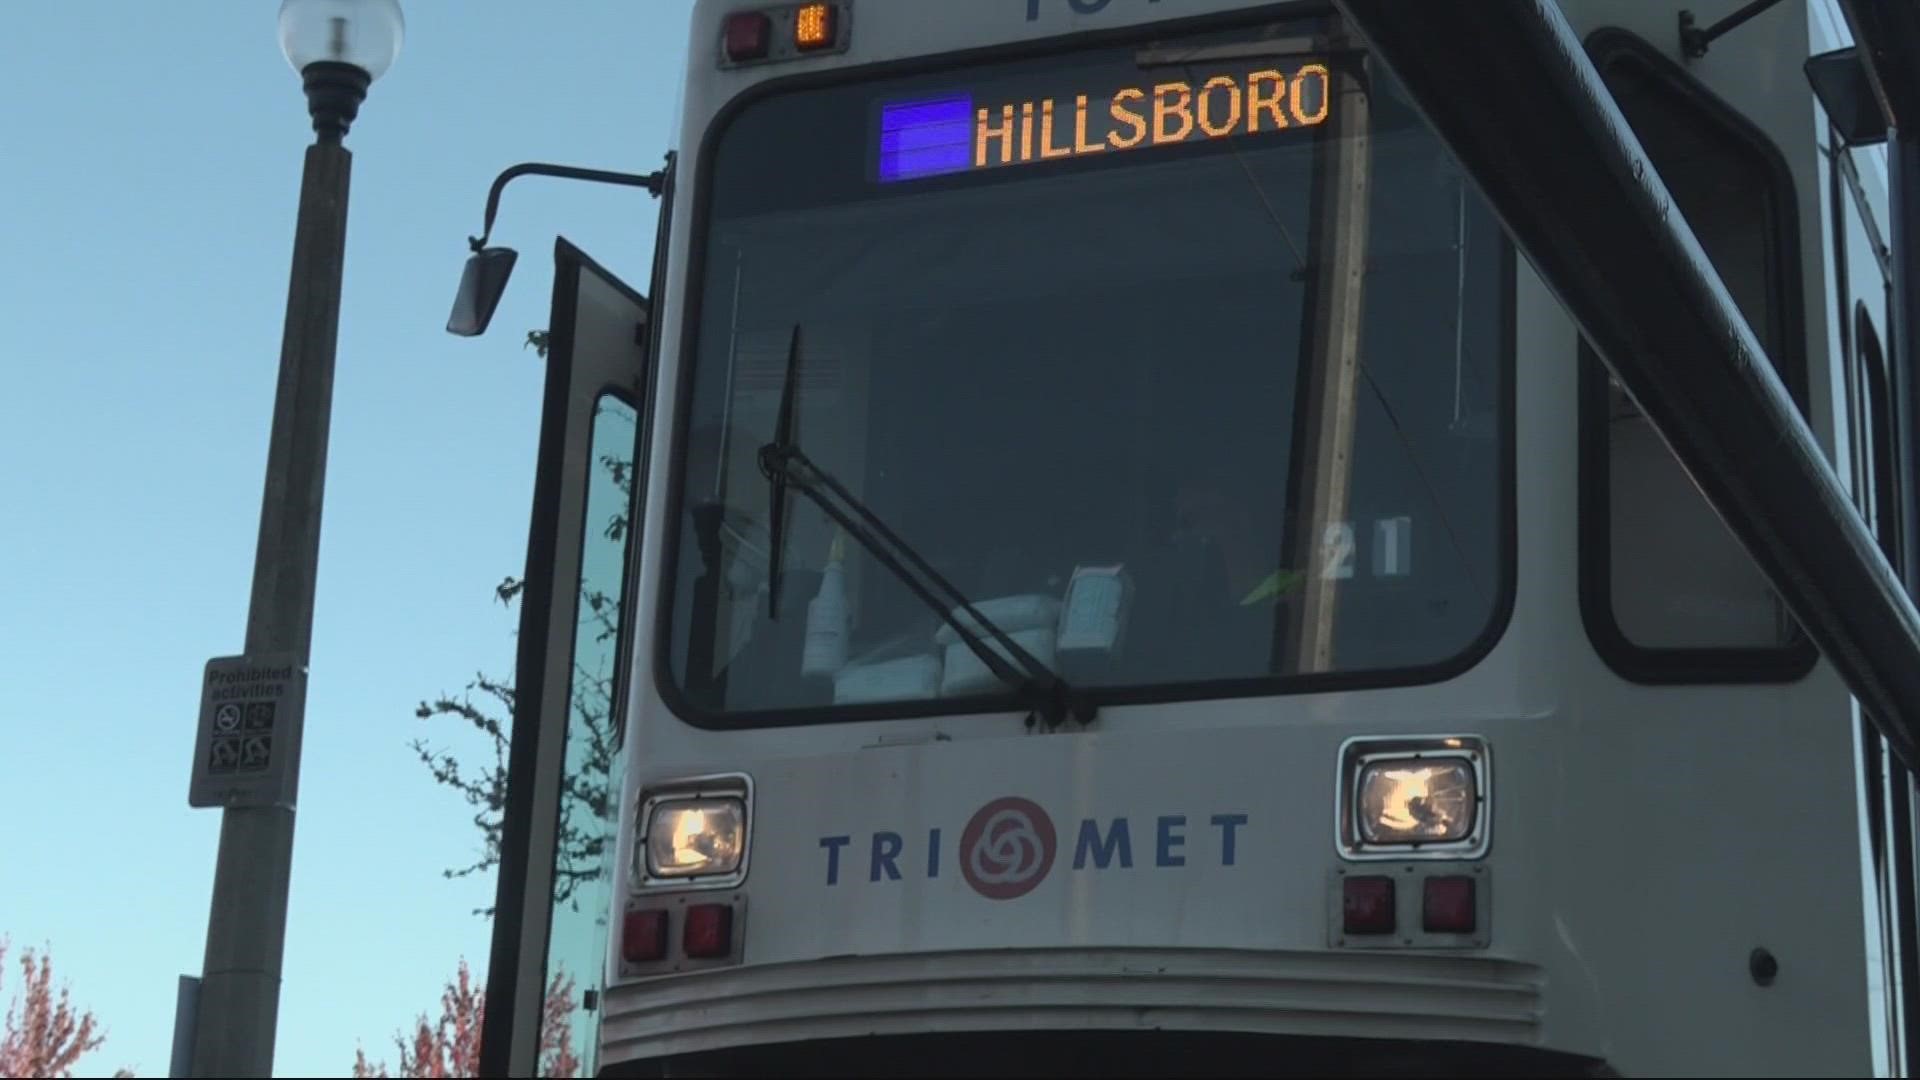 TriMet's MAX Blue line will be closed from Orenco station to the end of the line in Hillsboro for eight days due to some major renovations.